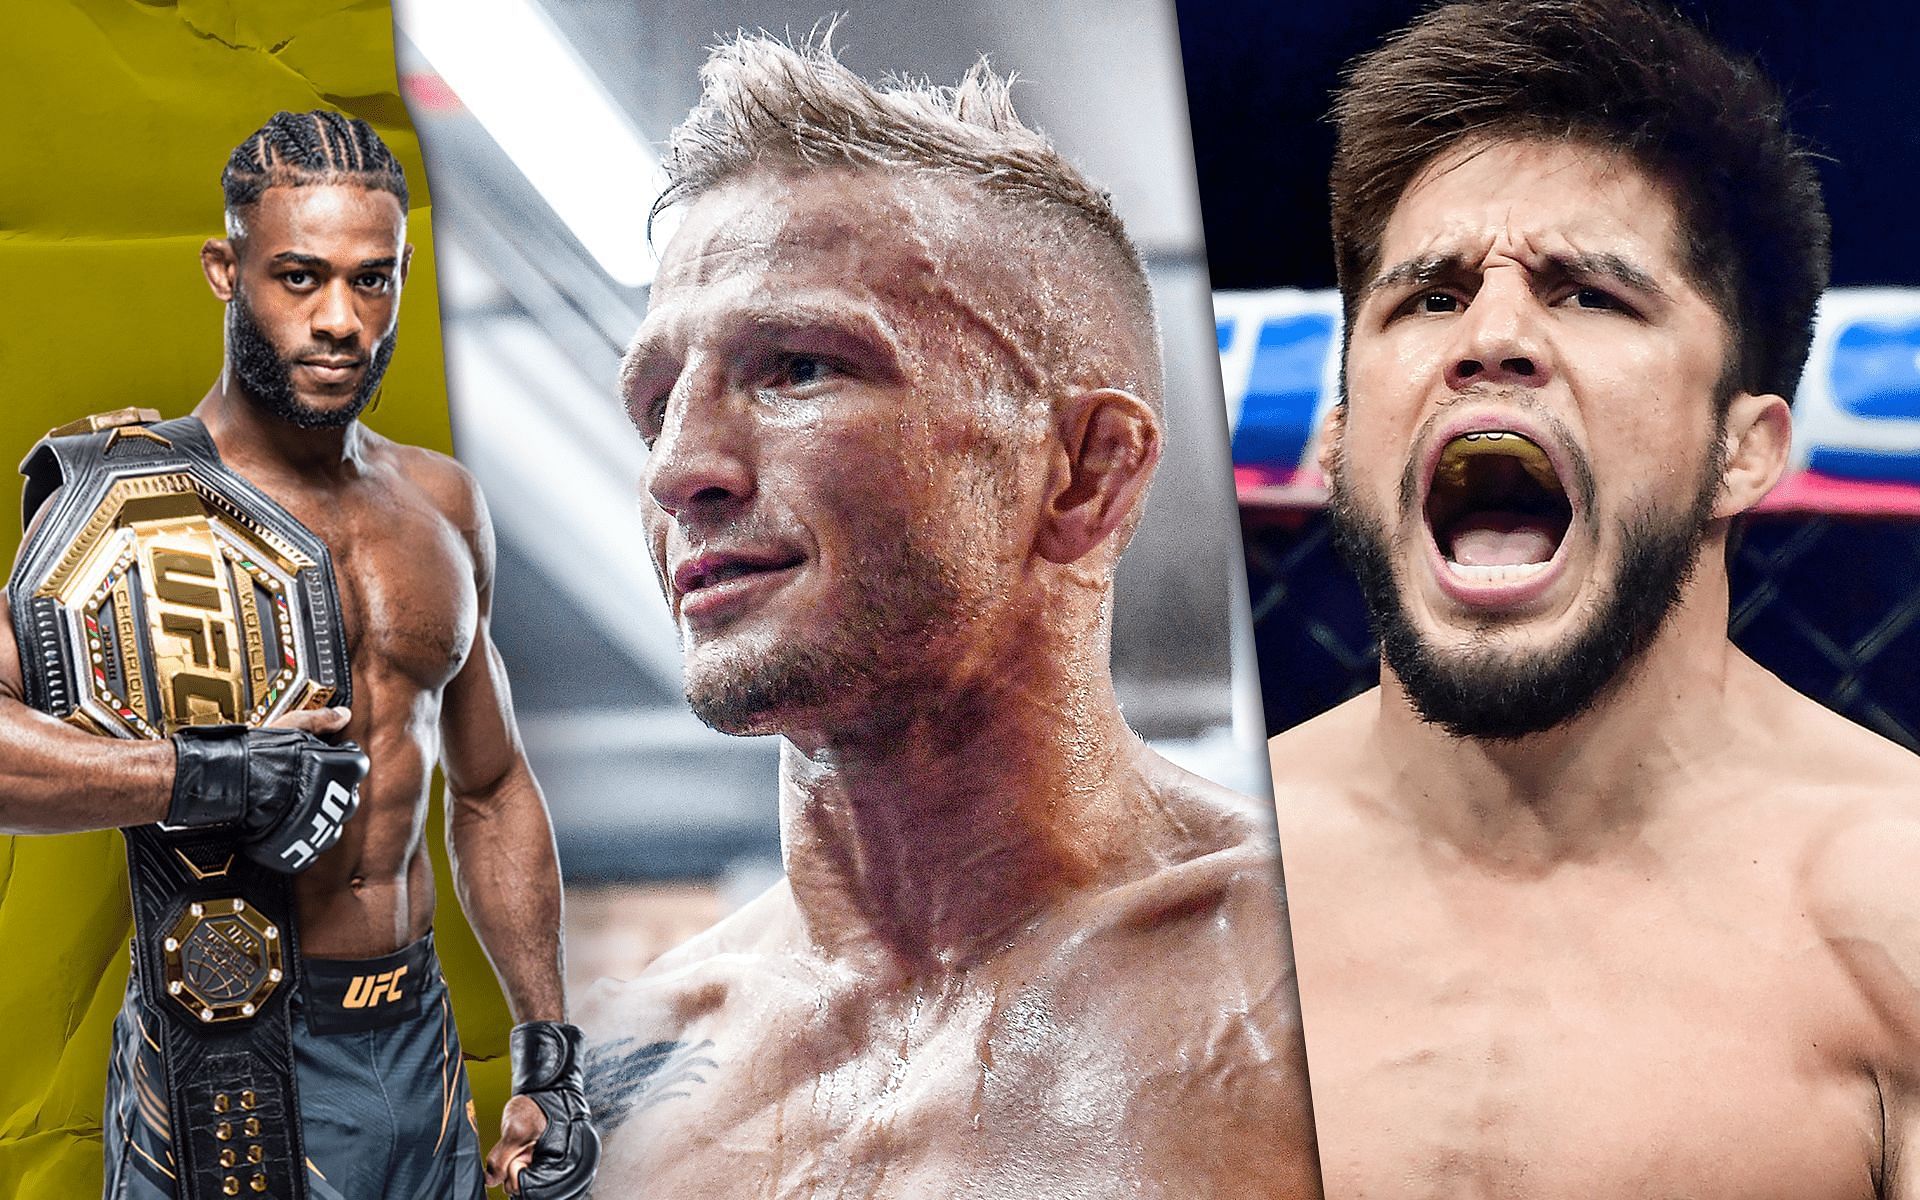 Aljamain Sterling, T.J. Dillashaw, and Henry Cejudo (left to right) [Sterling image courtesy - ufc.com; other images courtesy - Getty]